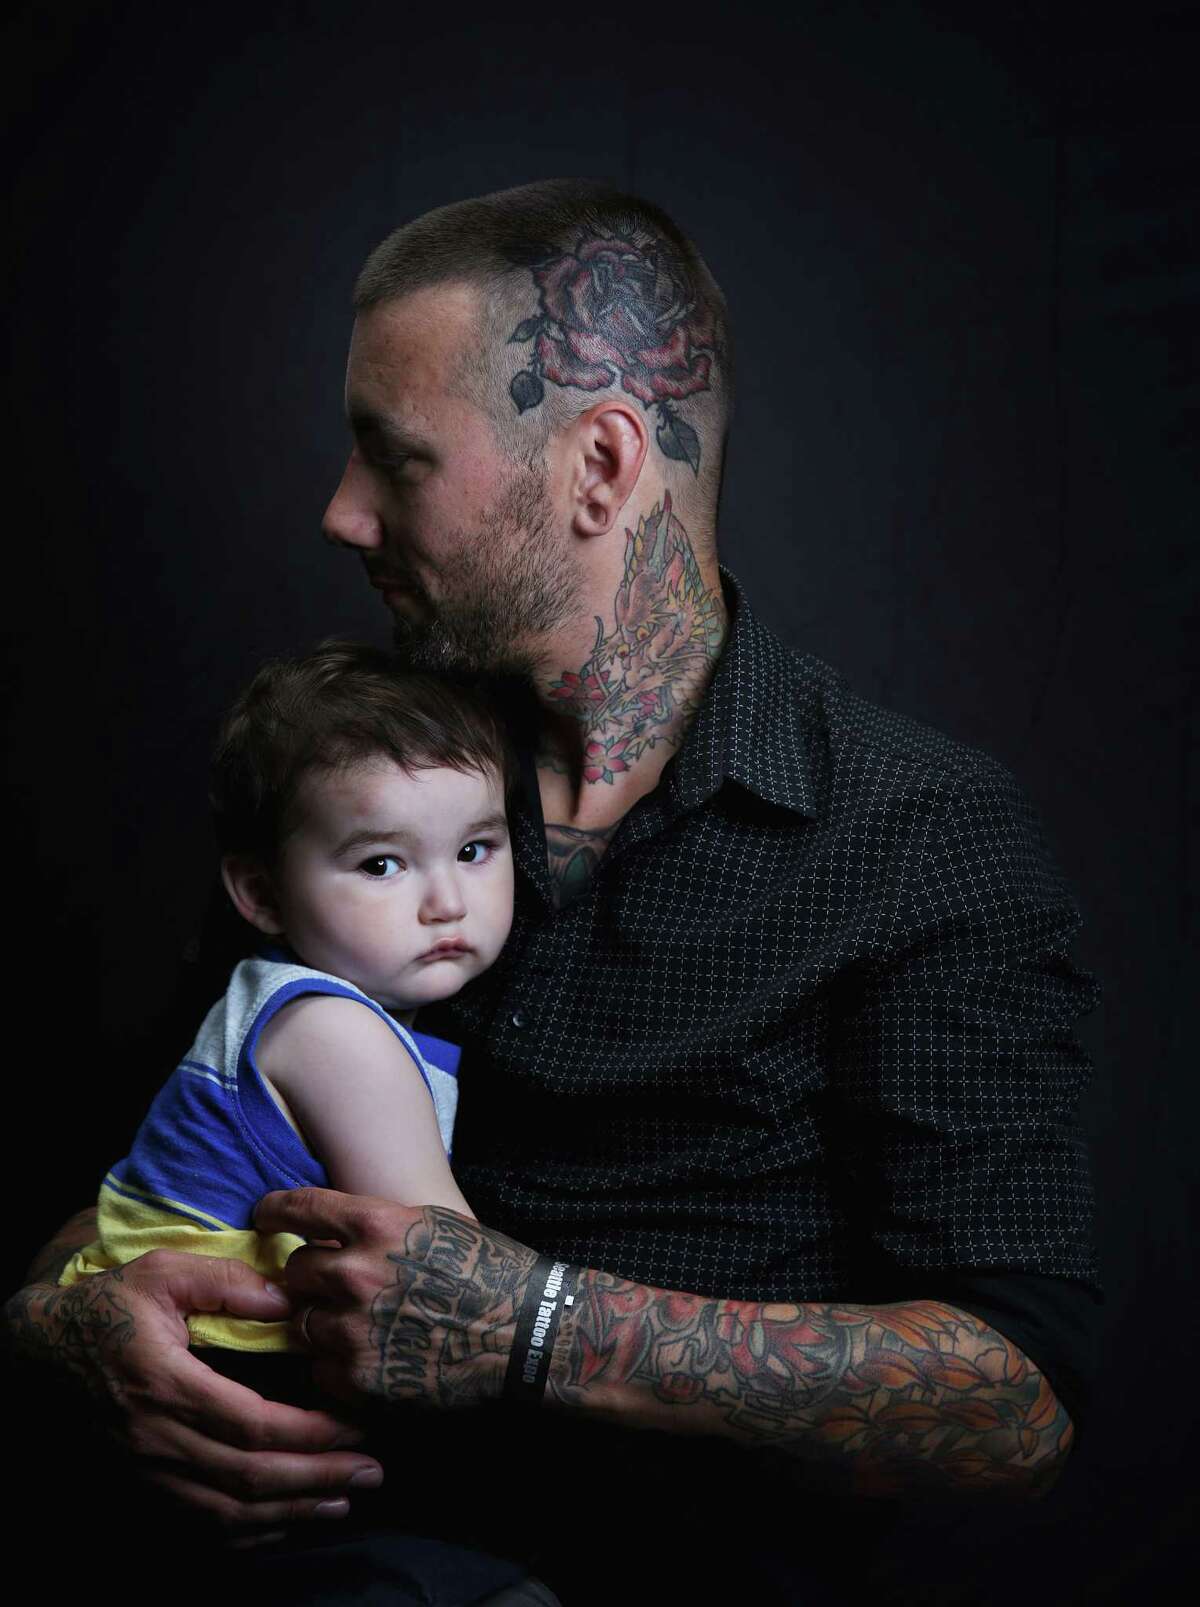 Curtis Stairs, a tattoo artist at Blue Geisha, and his one-year-old son Elijah pose for a portrait at the annual Seattle Tattoo Expo, Aug. 19, 2017 at Fisher Pavilion.